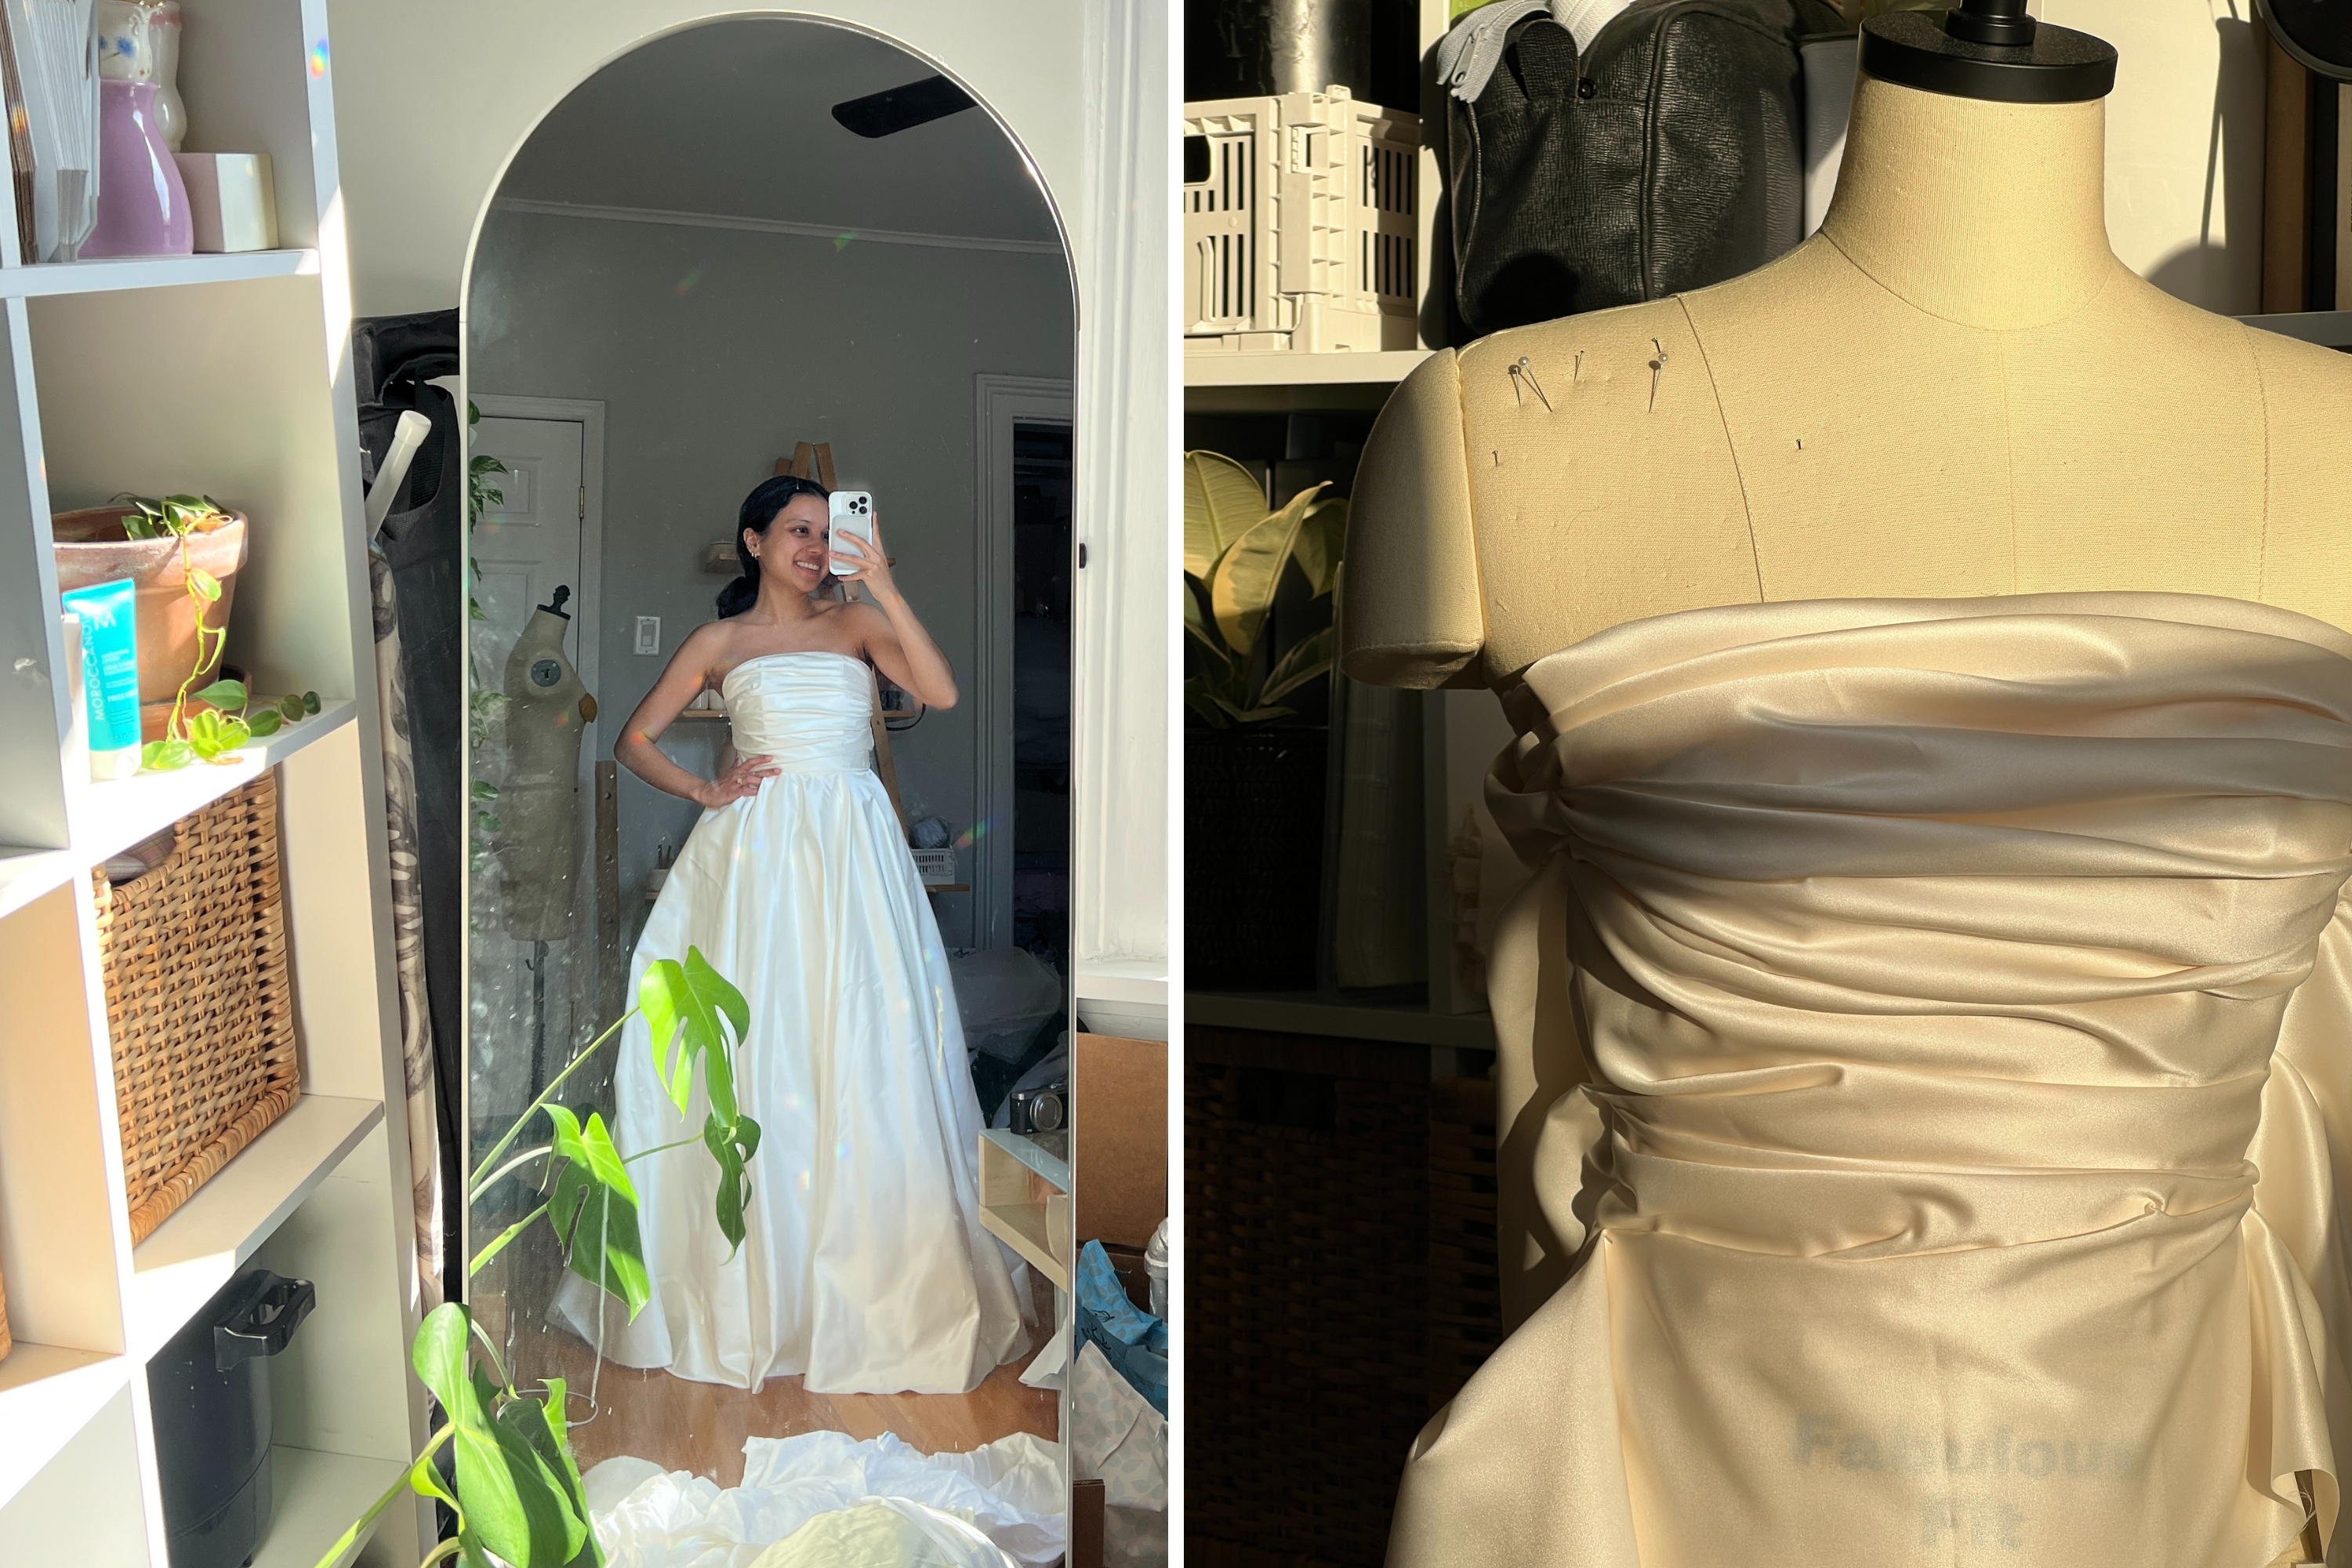 Bride disillusioned with wedding dress options takes matters into her own hands